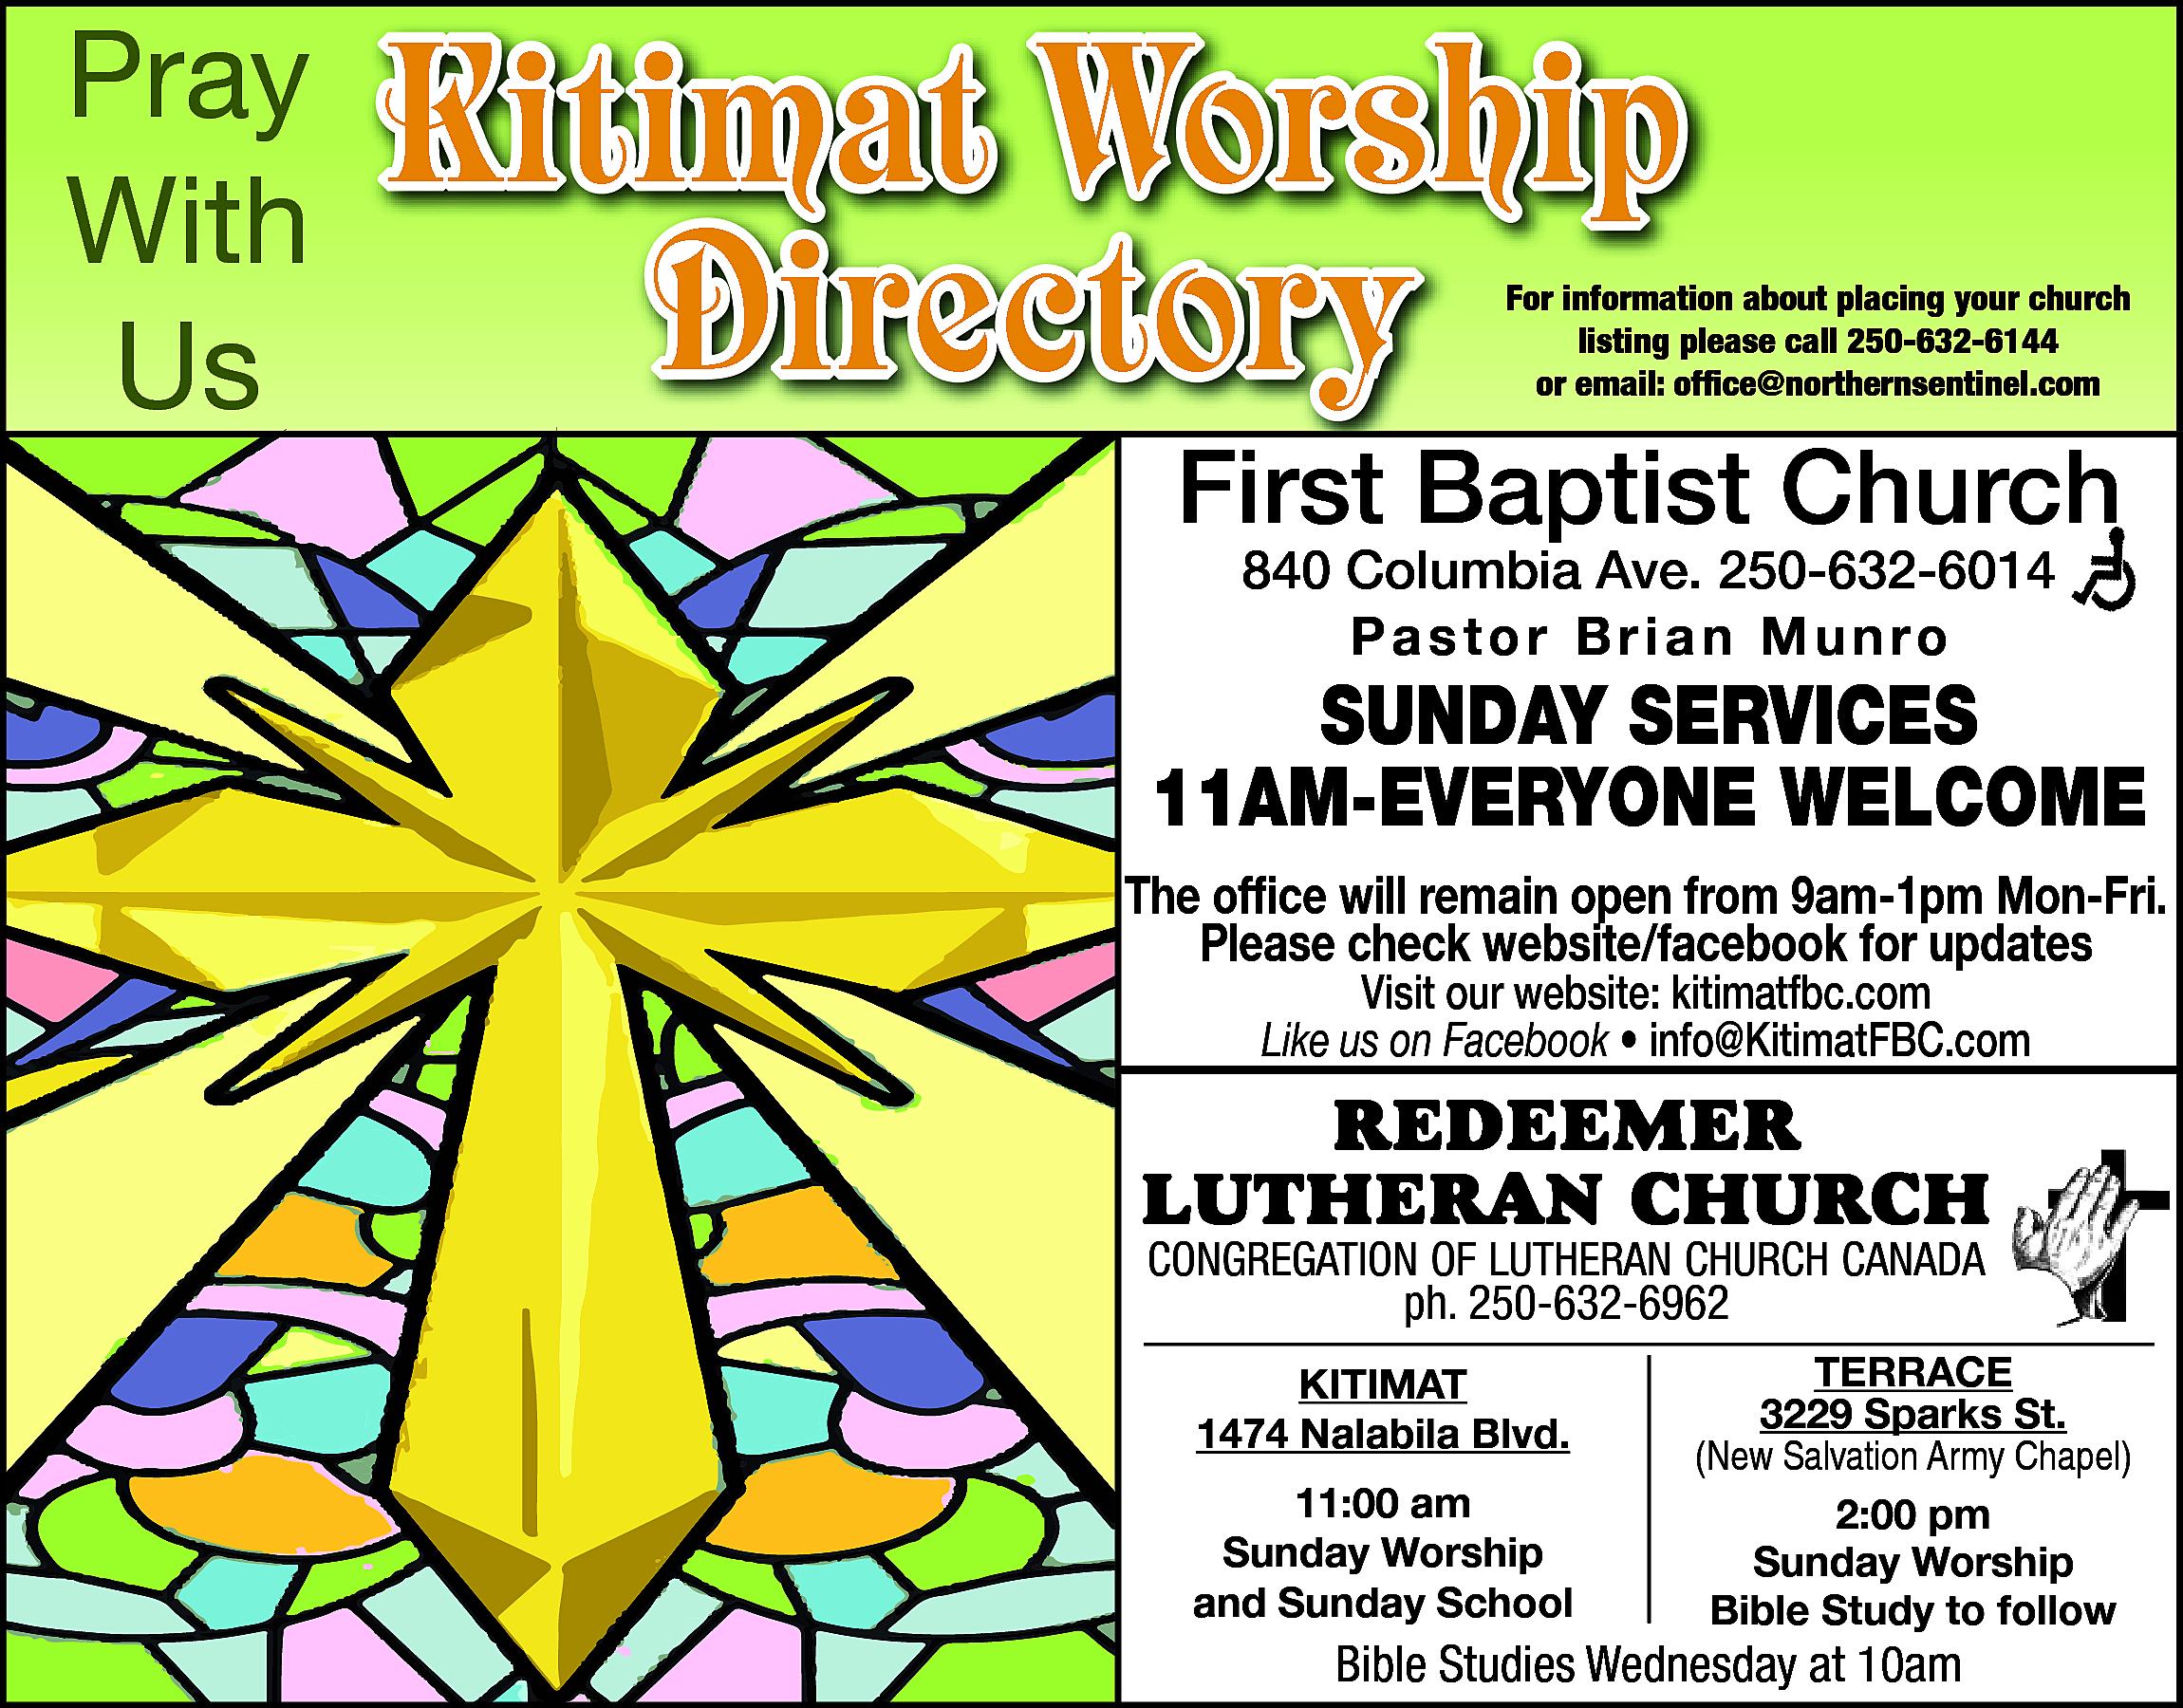 Pray <br>With <br>Us <br> <br>Kitimat  Pray  With  Us    Kitimat Worship  Directory    For information about placing your church  listing please call 250-632-6144  or email: office@northernsentinel.com    First Baptist Church  840 Columbia Ave. 250-632-6014  Pastor Brian Munro    SUNDAY SERVICES  11AM-EVERYONE WELCOME  The office will remain open from 9am-1pm Mon-Fri.  Please check website/facebook for updates  Visit our website: kitimatfbc.com  Like us on Facebook • info@KitimatFBC.com    RedeemeR  LutheRan ChuRCh  Congregation of Lutheran ChurCh Canada  ph. 250-632-6962  ph. 250-632-6962  • Pastor Alan Visser  Kitimat  Kitimat  1474 Nalabila Blvd.    1474 Nalabila Blvd.  11:00 am  11:00  am  Sunday Worship  Sunday  Worship  and Sunday School    terrace  3229  Sparks St.  terrace  (New Salvation Army Chapel)  3229 Sparks St.  2:00 pm  (NewSunday  SalvationWorship  Army Chapel)  Bible Study to follow    Bible  on Facebook  BibleStudies  StudiesAvailable  Wednesday  at 10am    